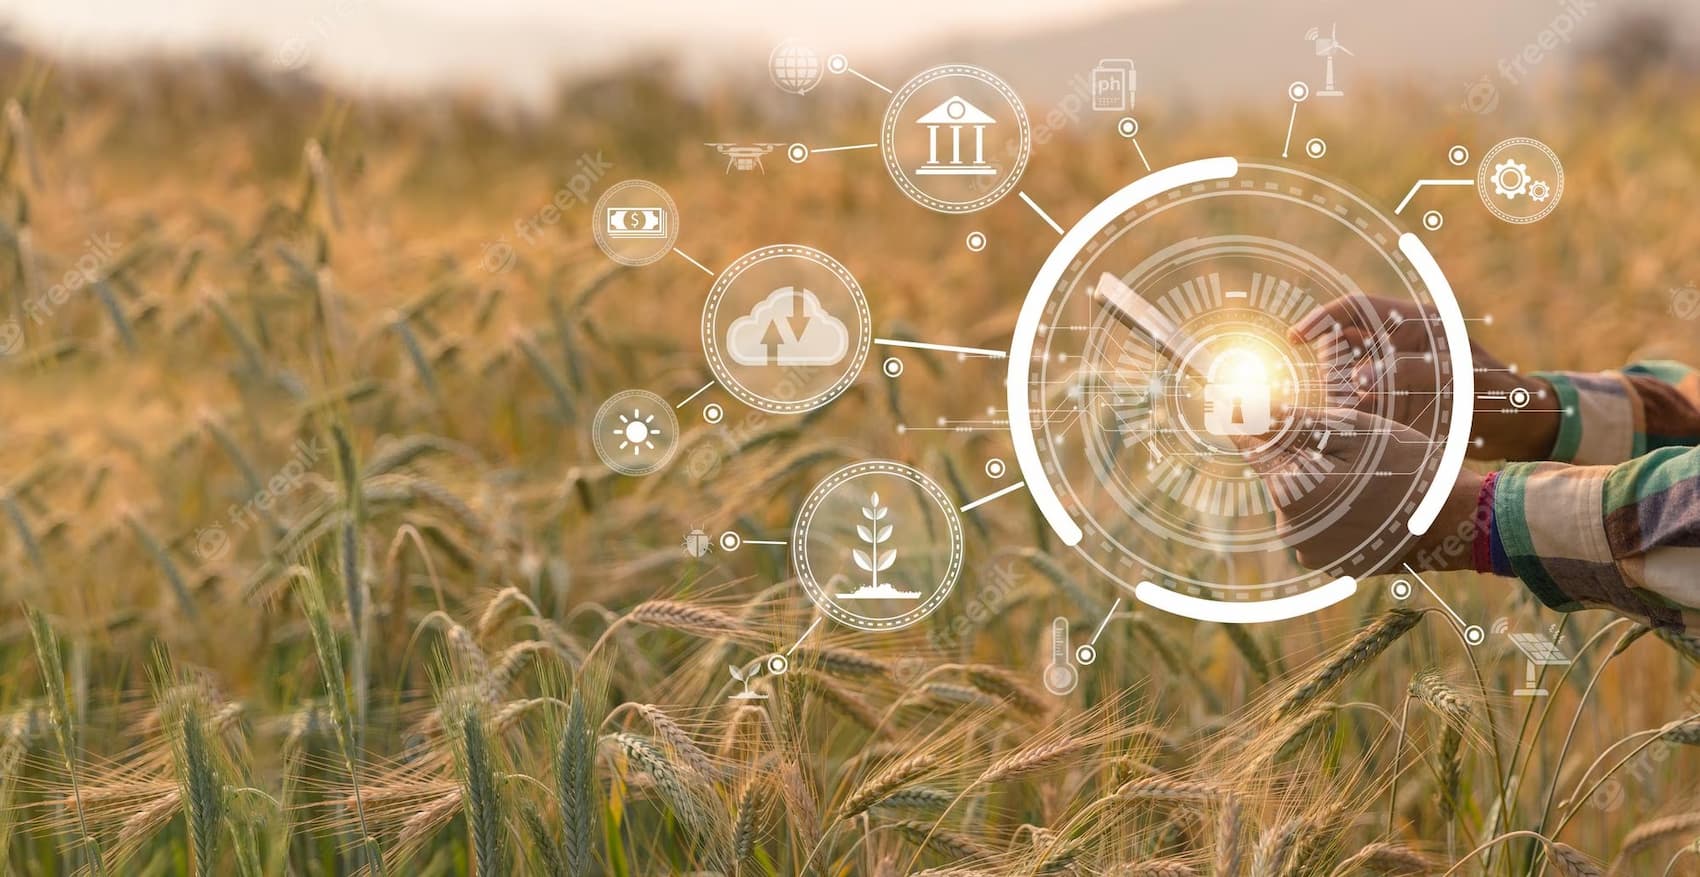 Modern Farming Technologies in Agriculture: 8 Great Examples